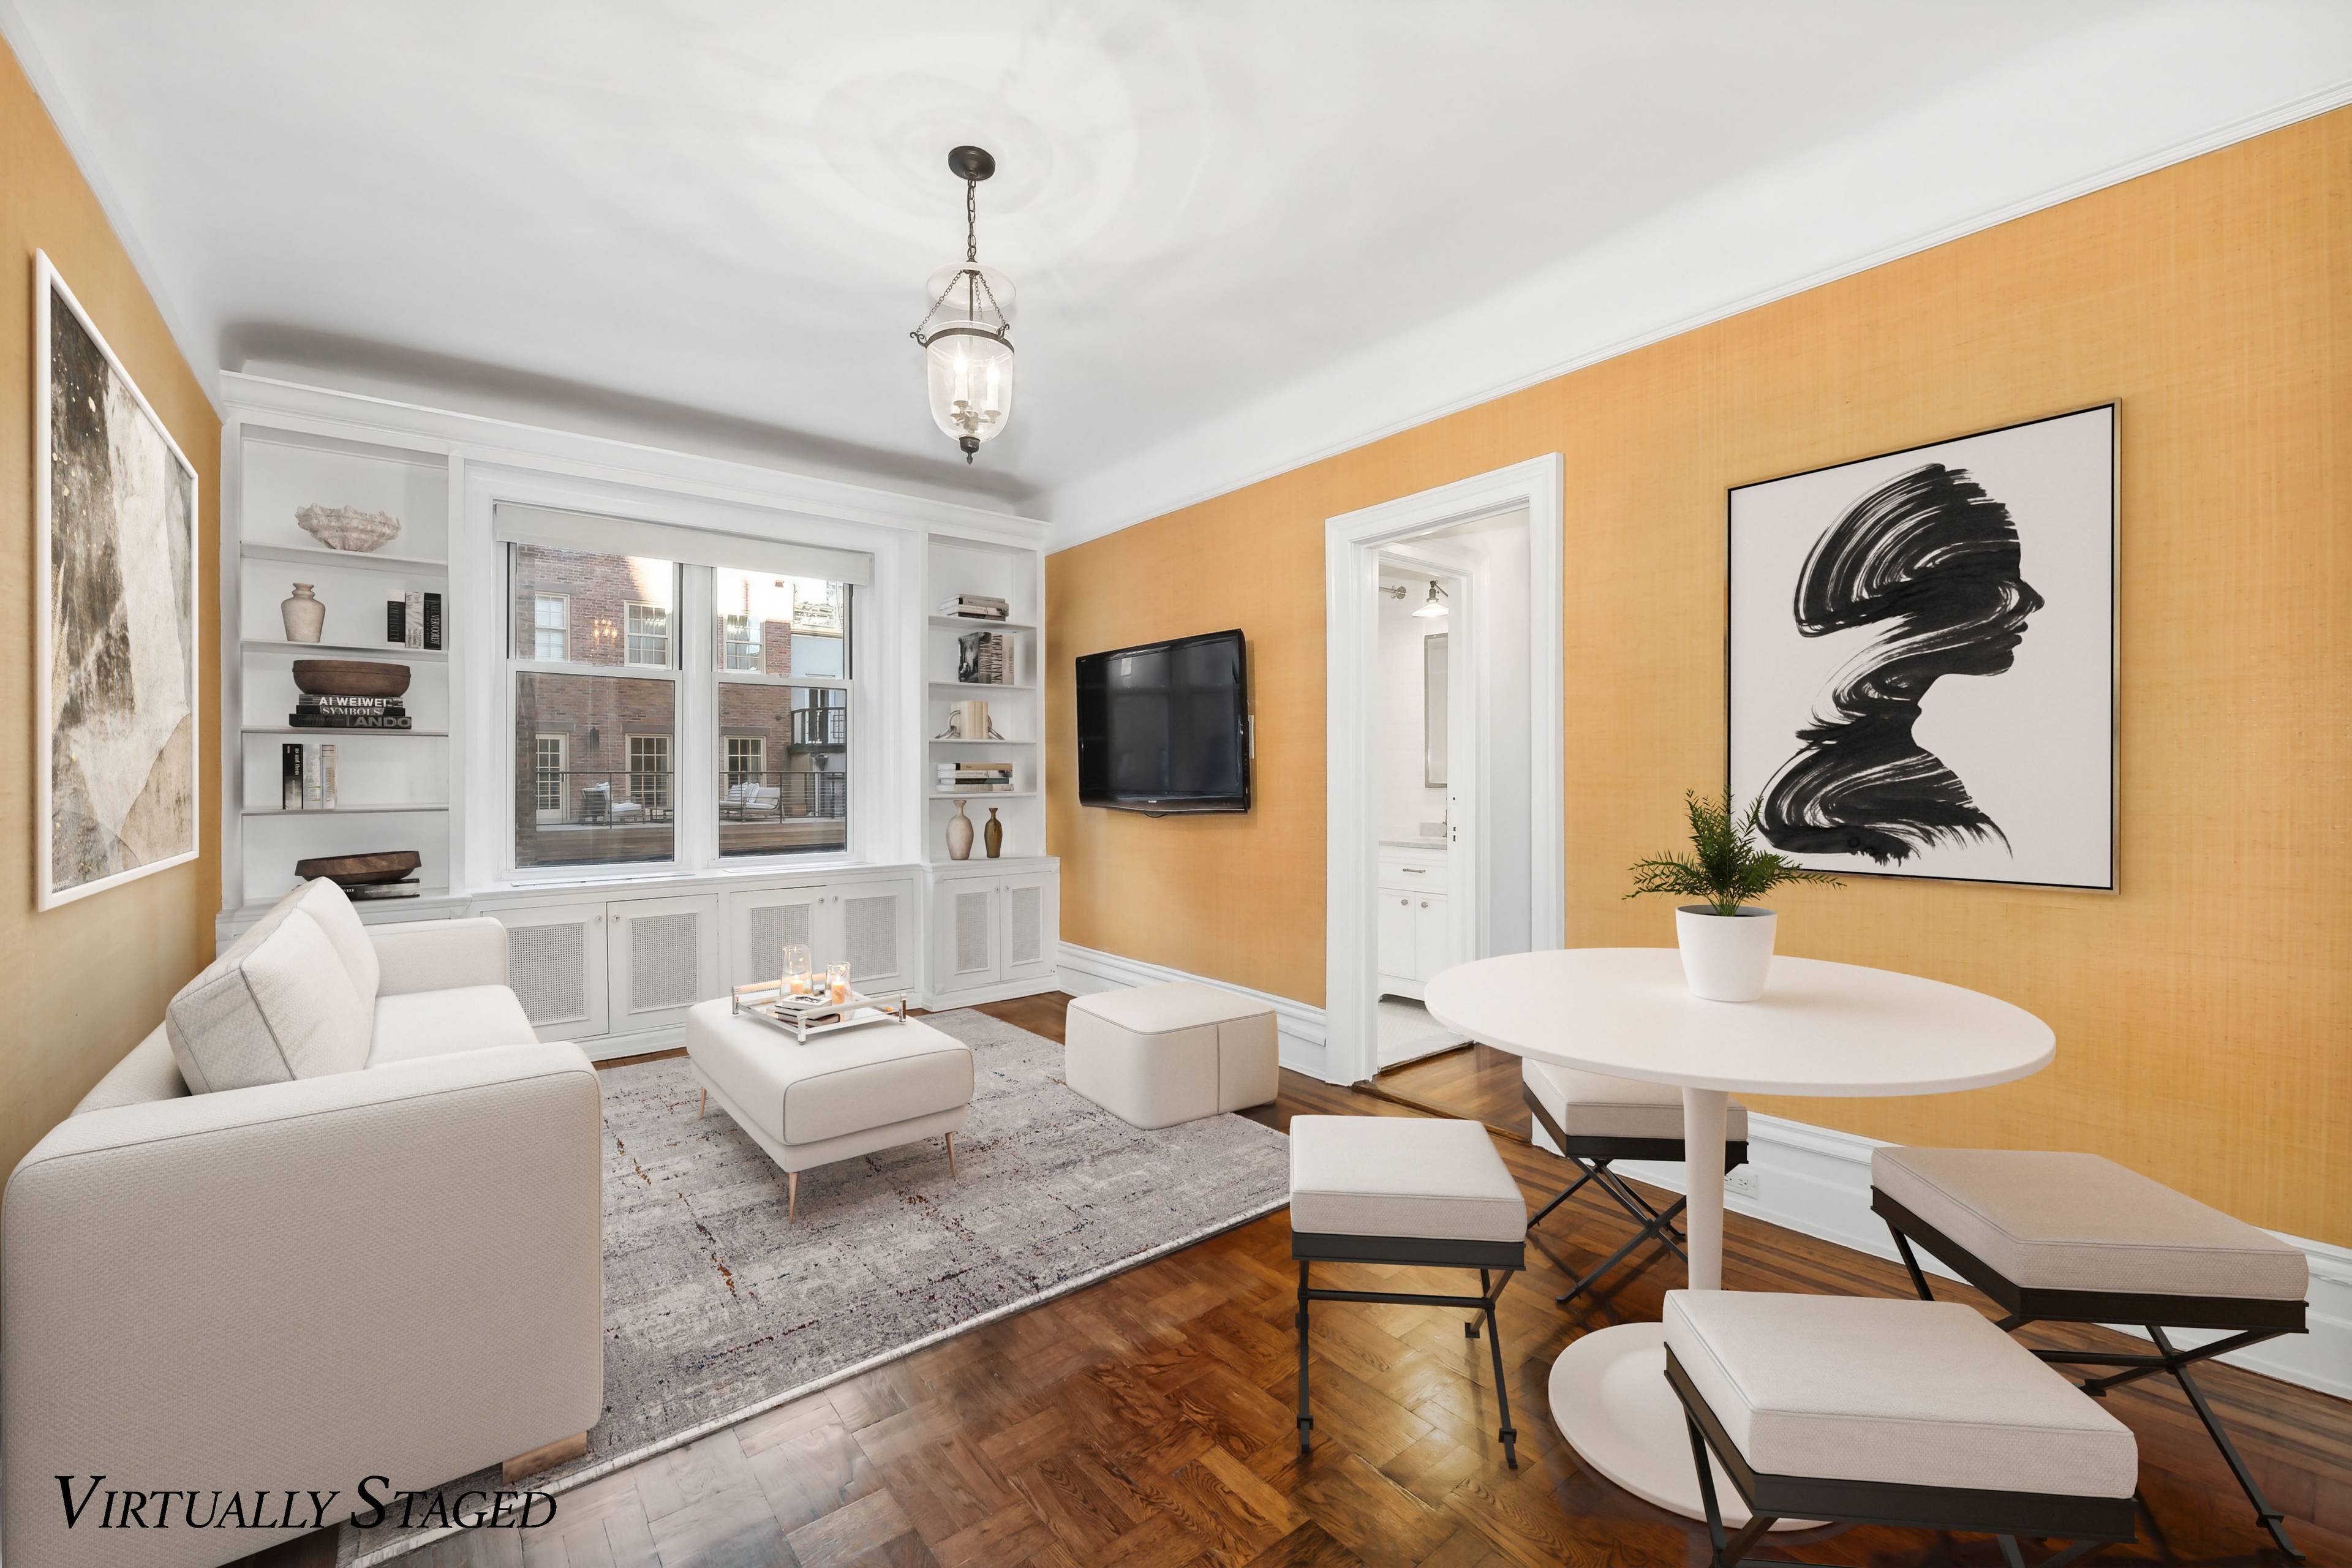 BACK ON THE MARKET ! ! Enter this fabulous prewar apartment through an oversized entrance hall with grand 10 foot ceilings.